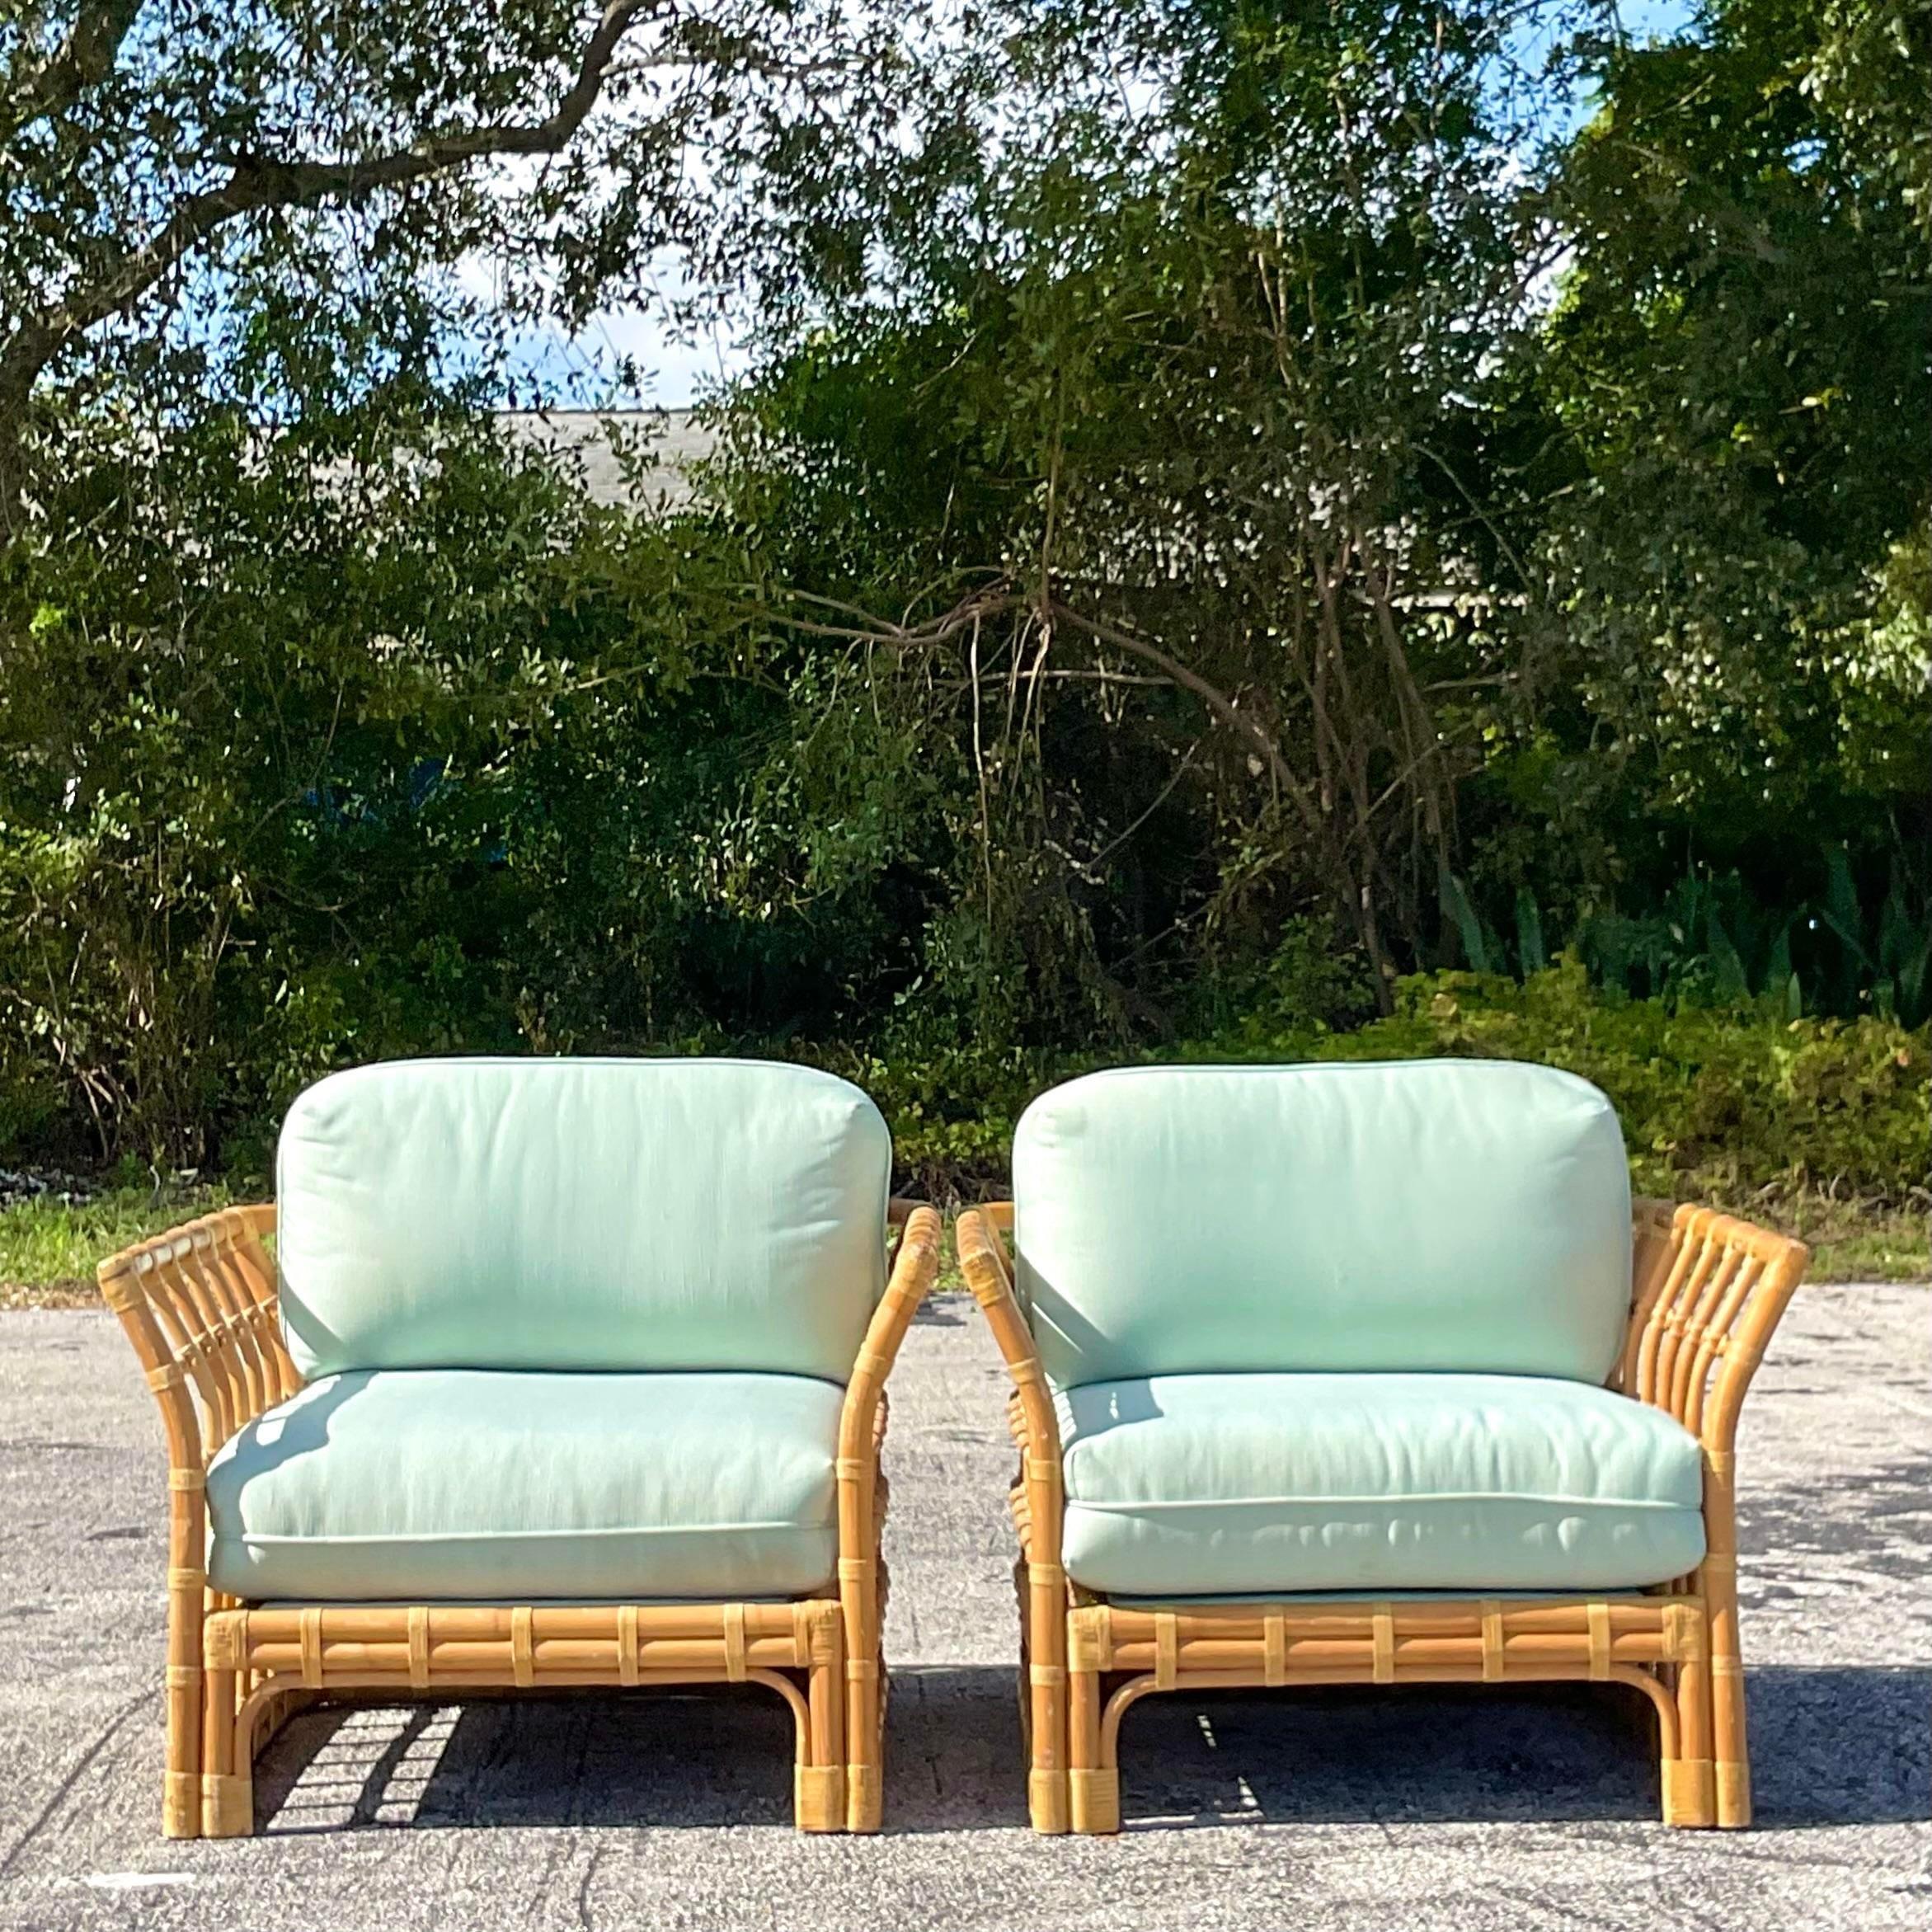 A stunning pair of vintage Coastal lounge chairs. A chic grid design with a winged shape. Deep seats with a pale green cushion. Acquired from a Palm Beach estate.